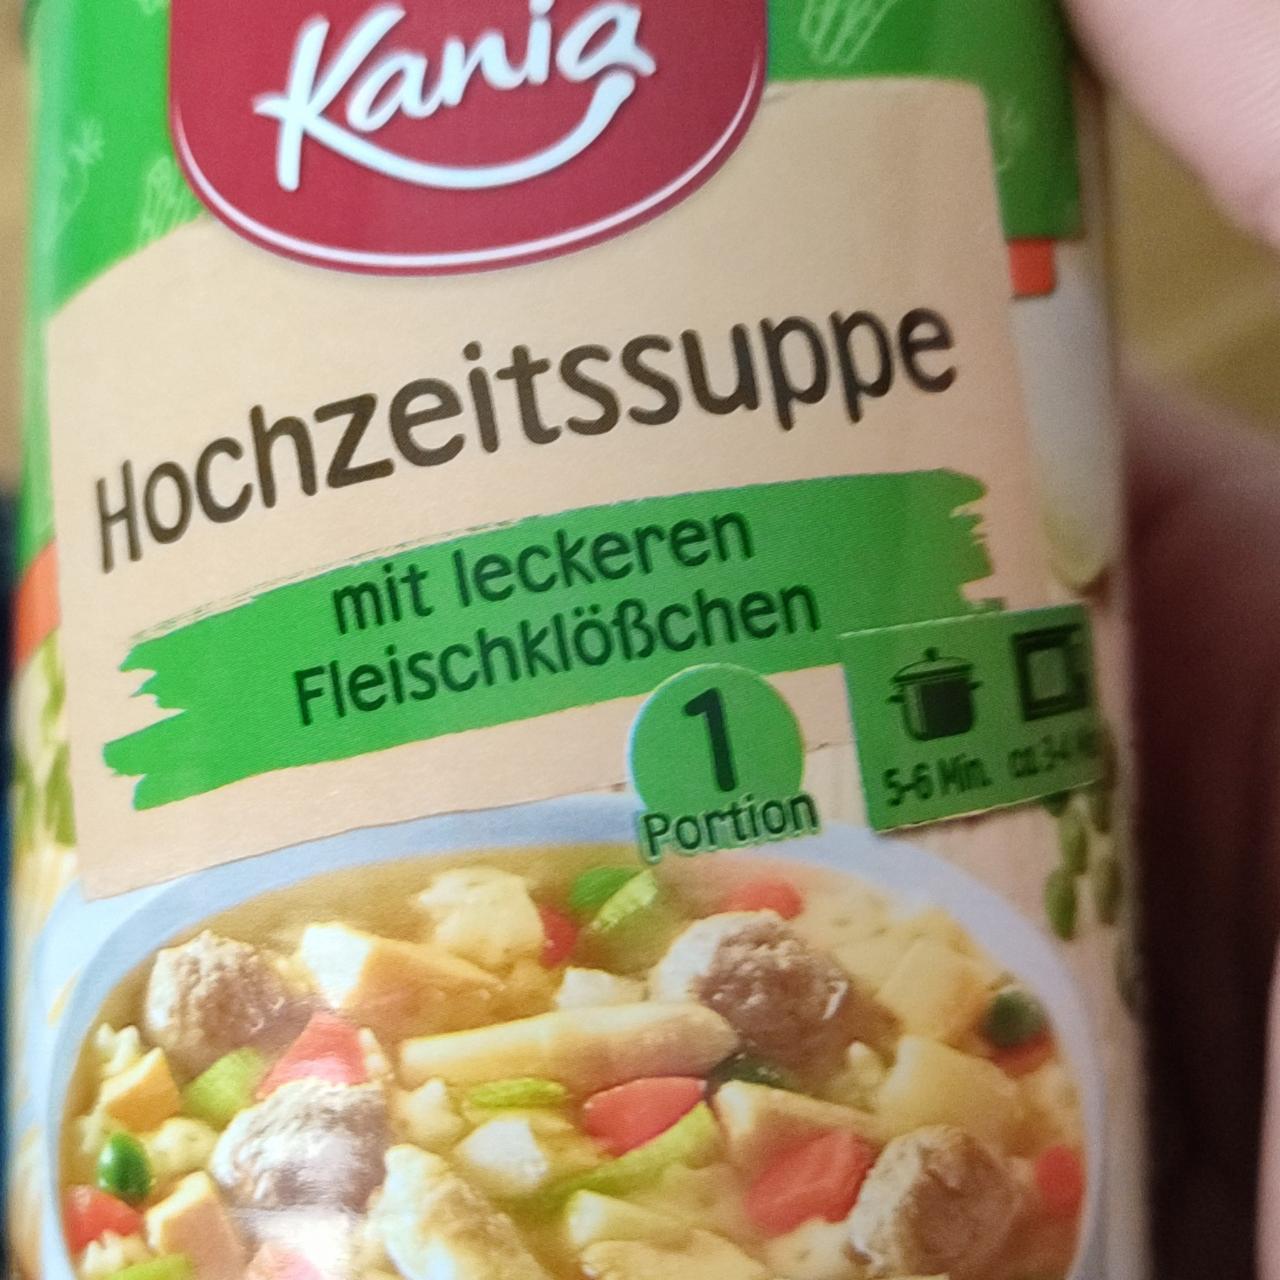 Фото - Hochzeitssuppe Kania